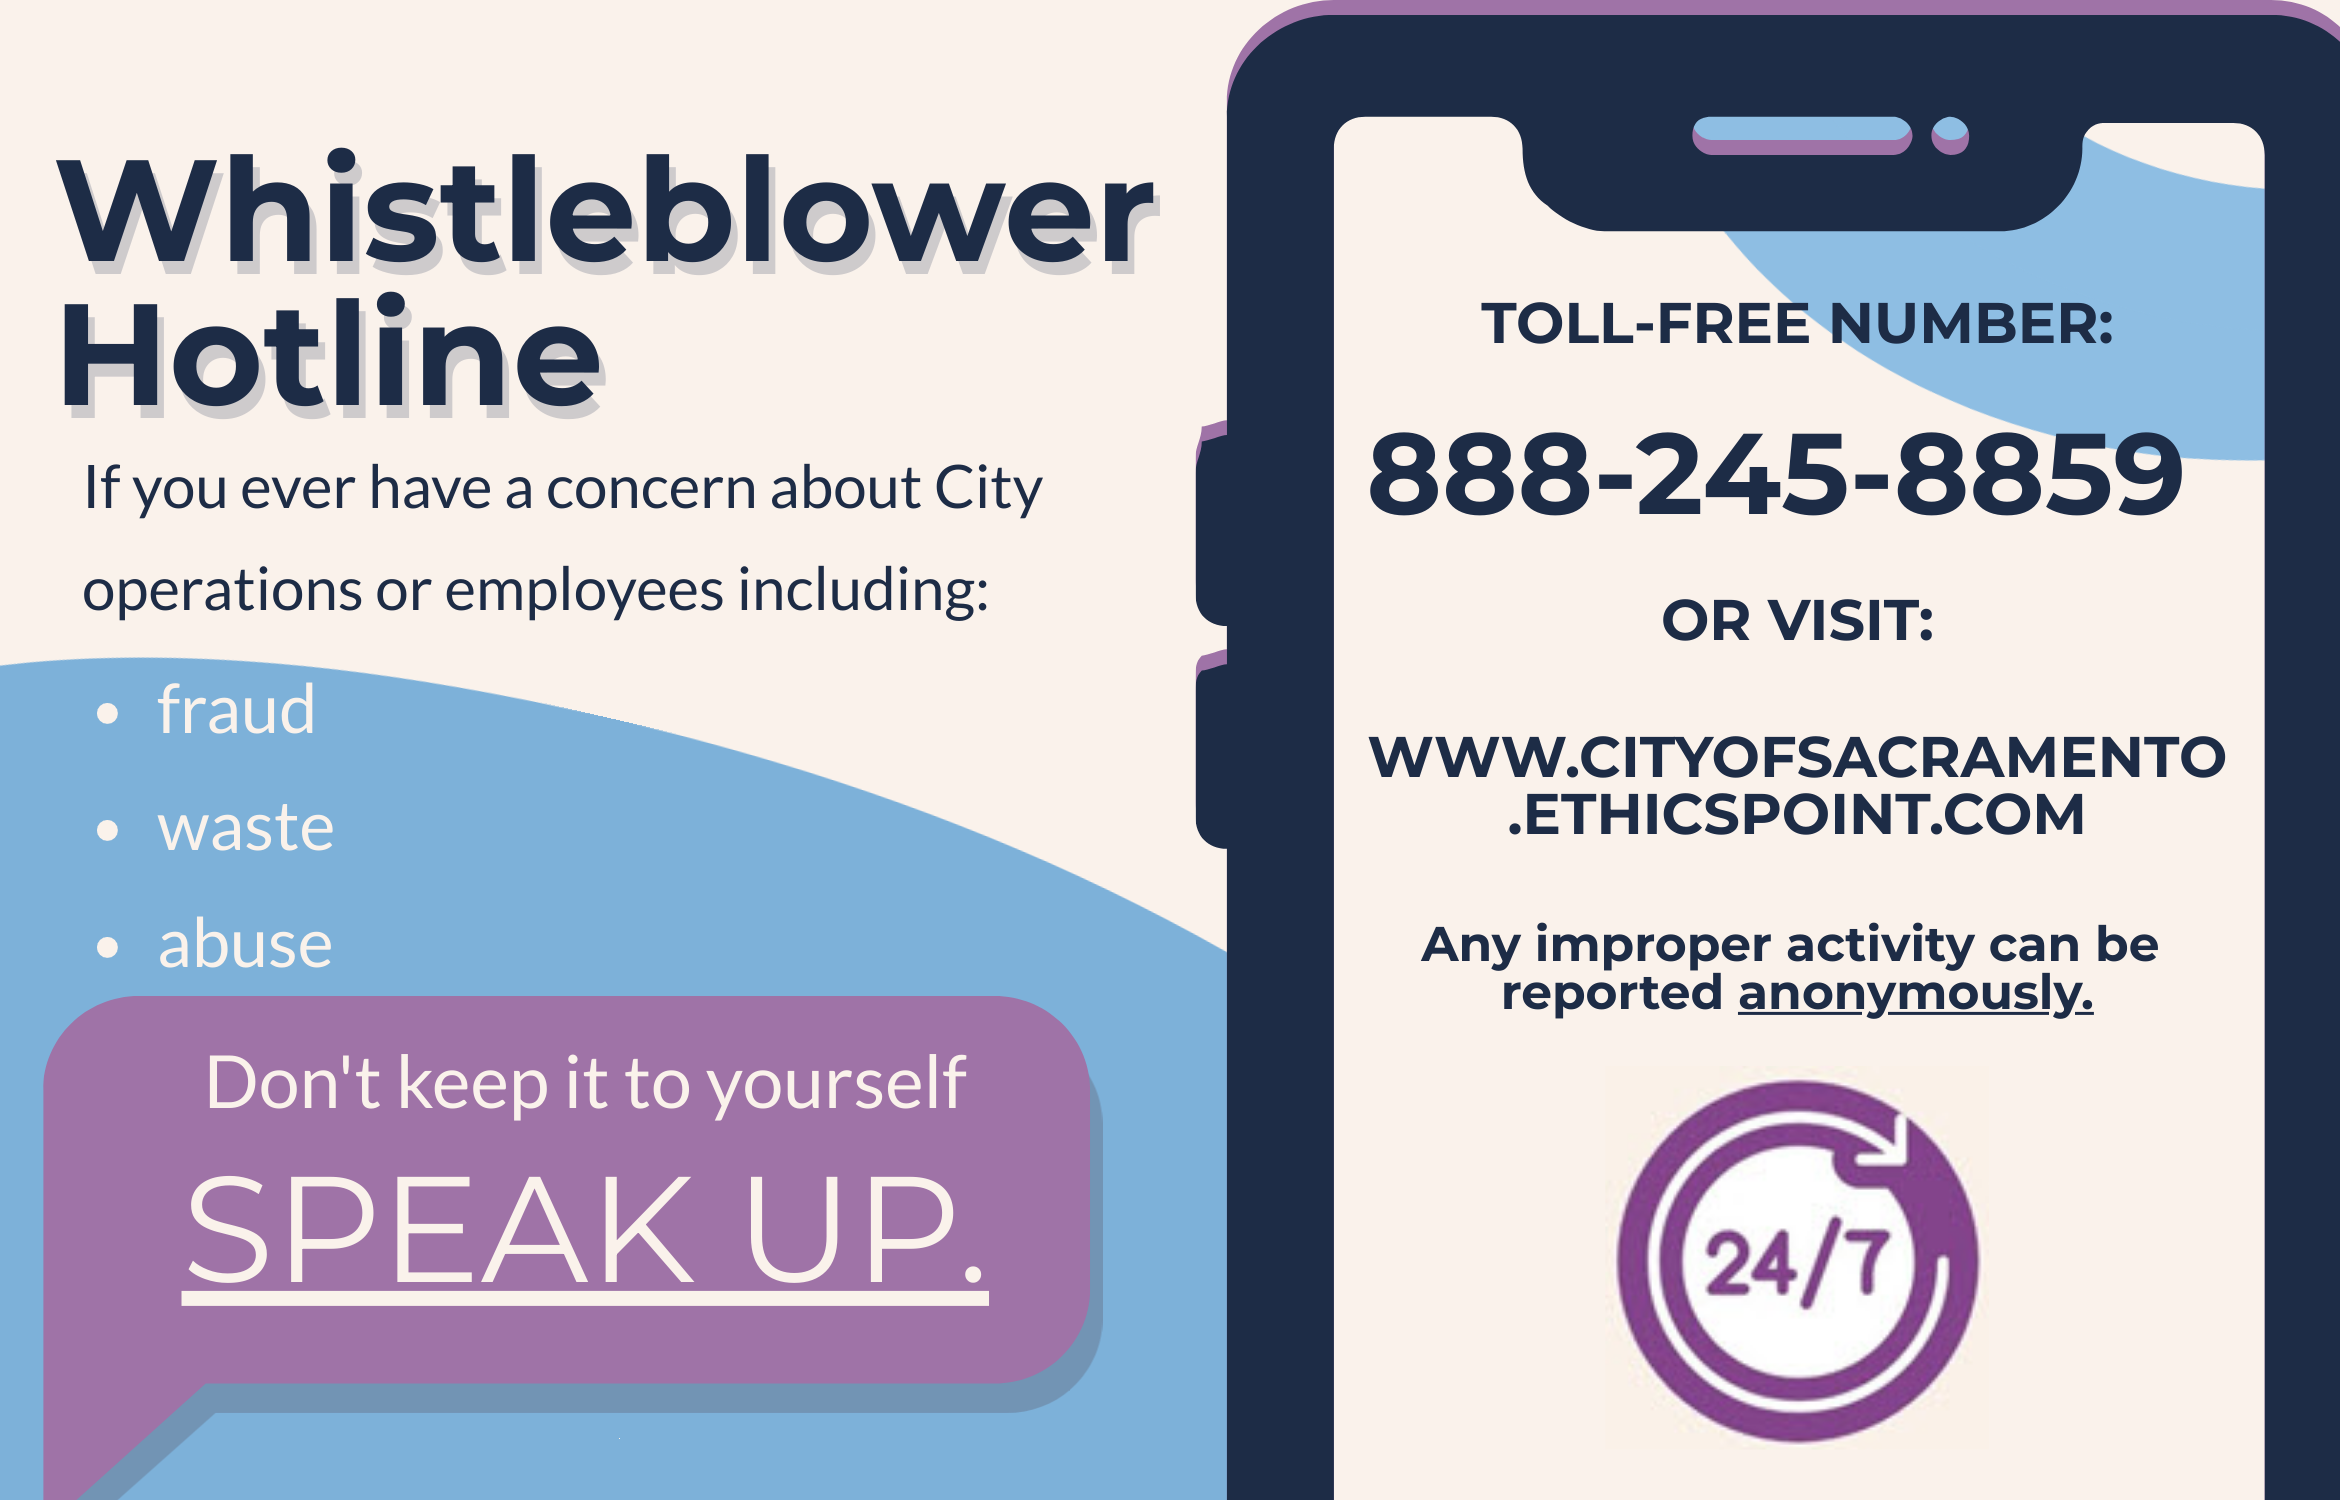 Whistleblower Hotline advertisement displaying toll free number 888-245-8859, web address www.cityofsacramento.ethicspoint.com, and identifying that any improper activity can be reported anonymously 24/7.